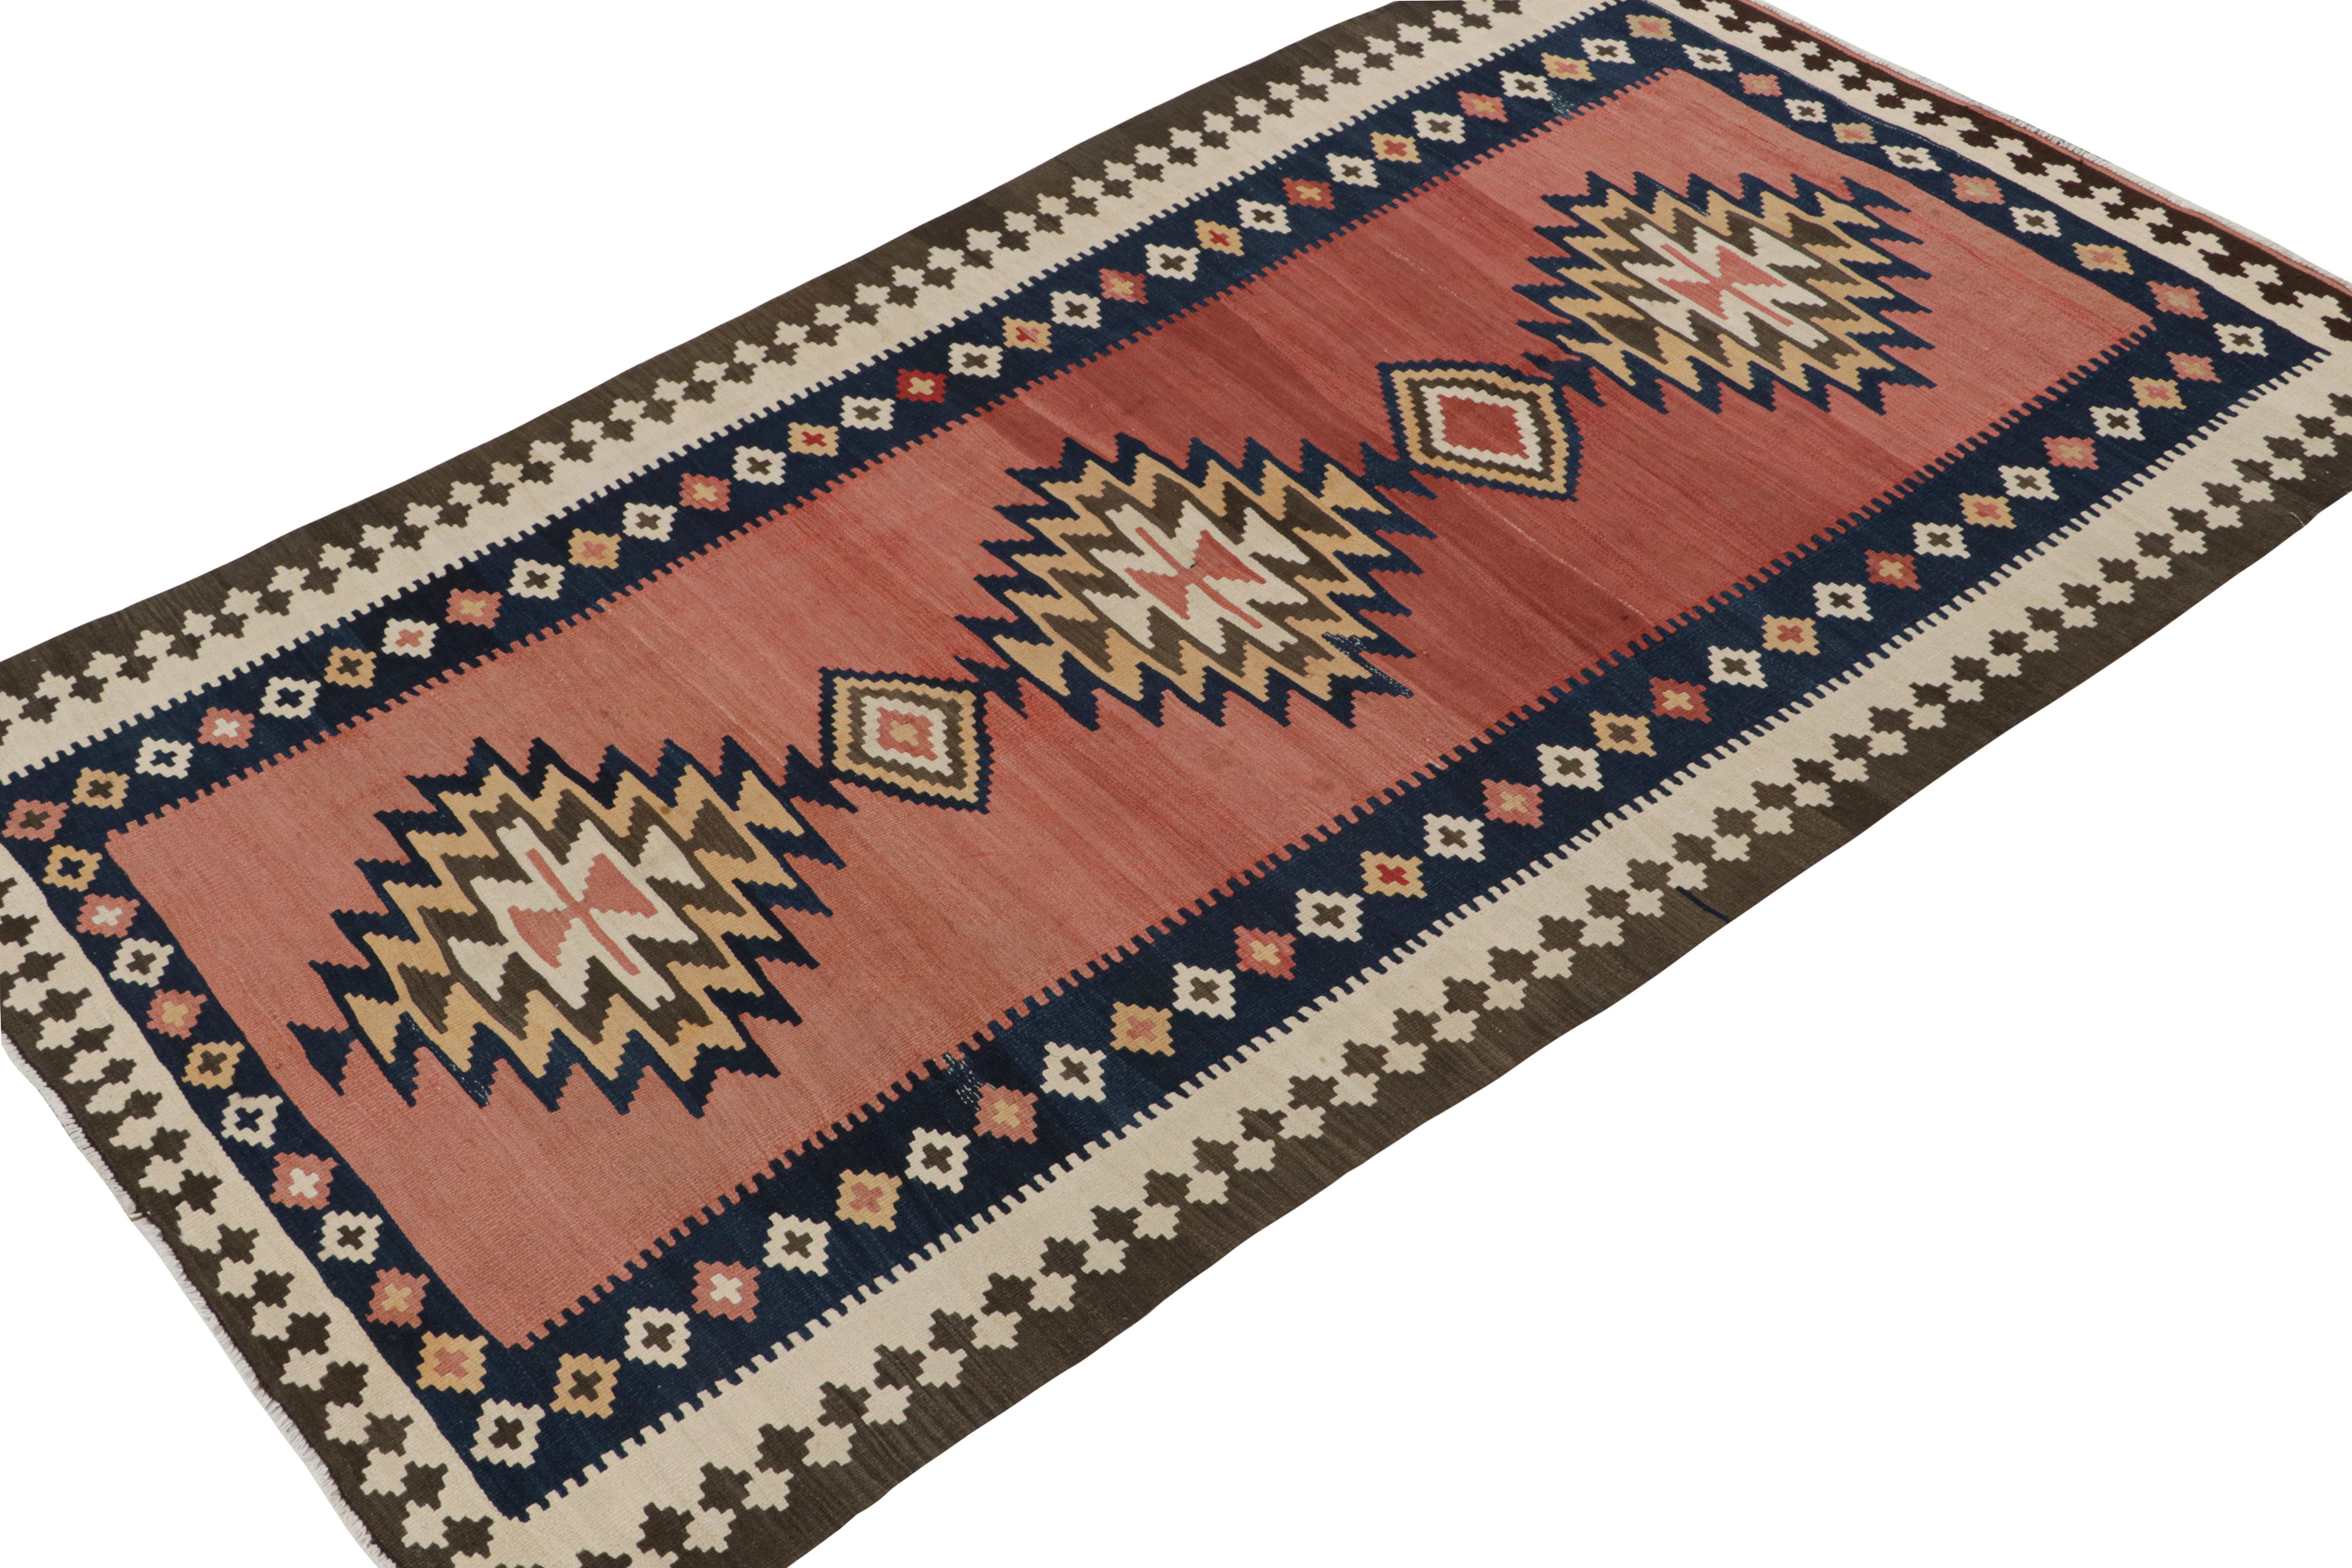 This vintage 5x9 Persian kilim is believed to be a Shahsavan tribal rug. Handwoven in wool, it originates circa 1950-1960. 

Further on the Design:

The design prefers polychromatic medallions on a red open field, wrapped in navy blue and